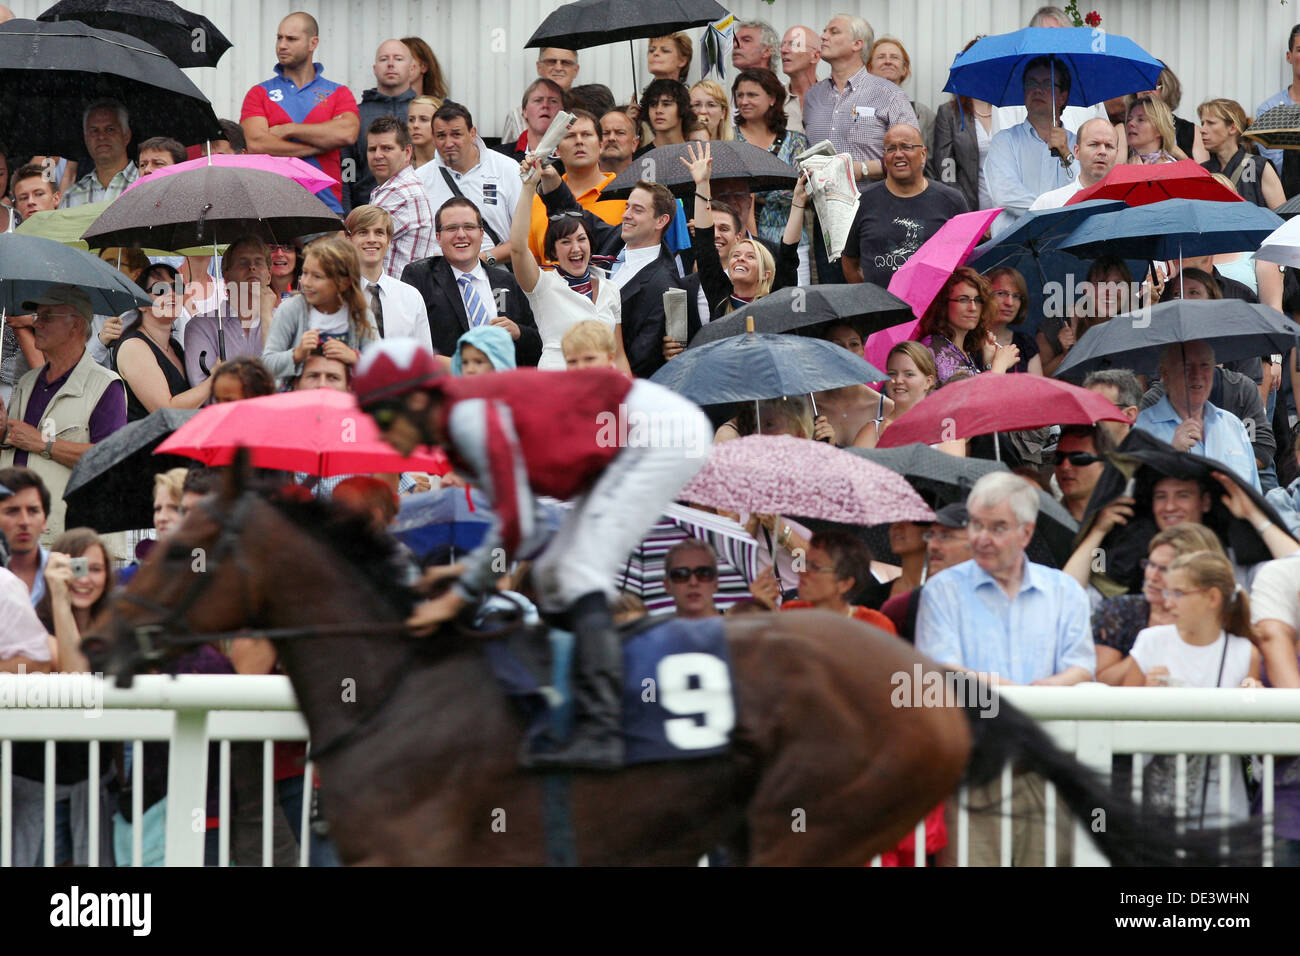 Iffezheim, Germany, people follow a horse race in the rain Stock Photo